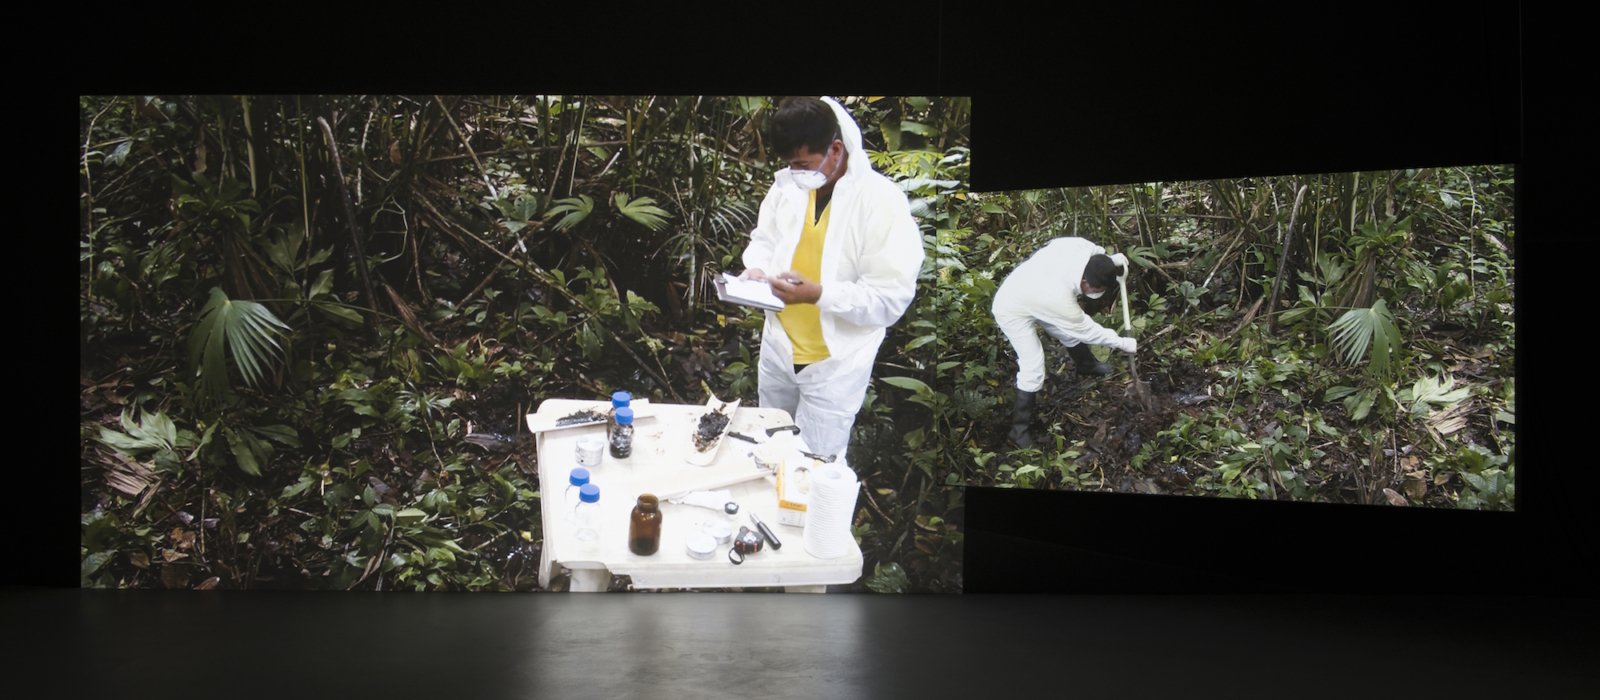 Two pictures showing a person in front of a table with chemicals in a forest.